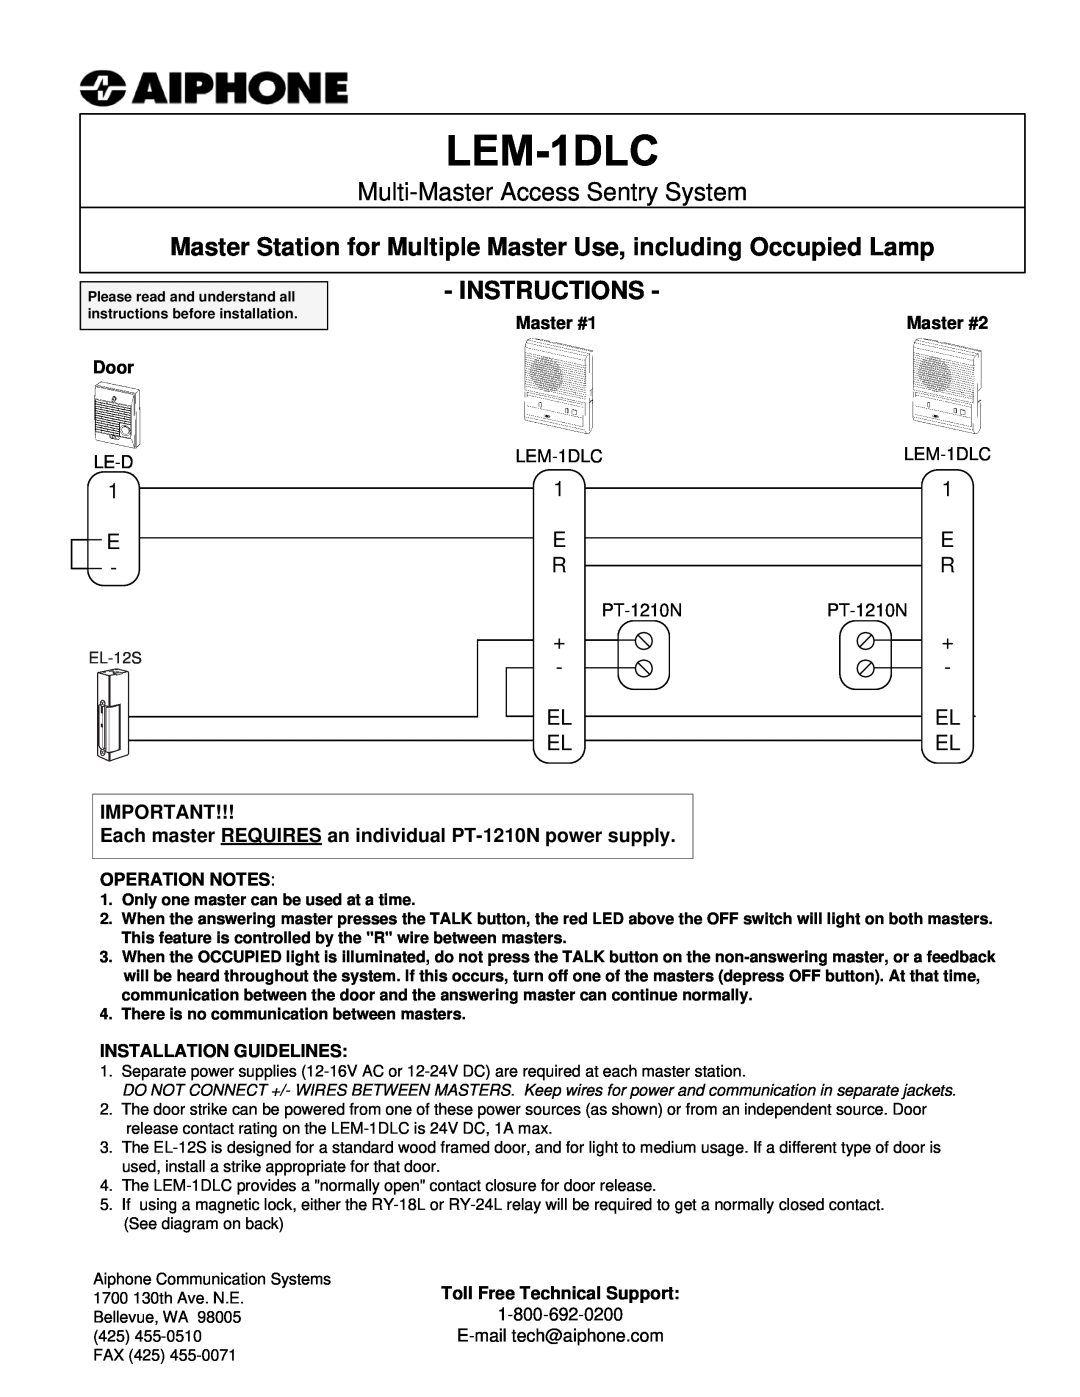 Aiphone PT-1210NPT-1210N manual Multi-MasterAccess Sentry System, Instructions 